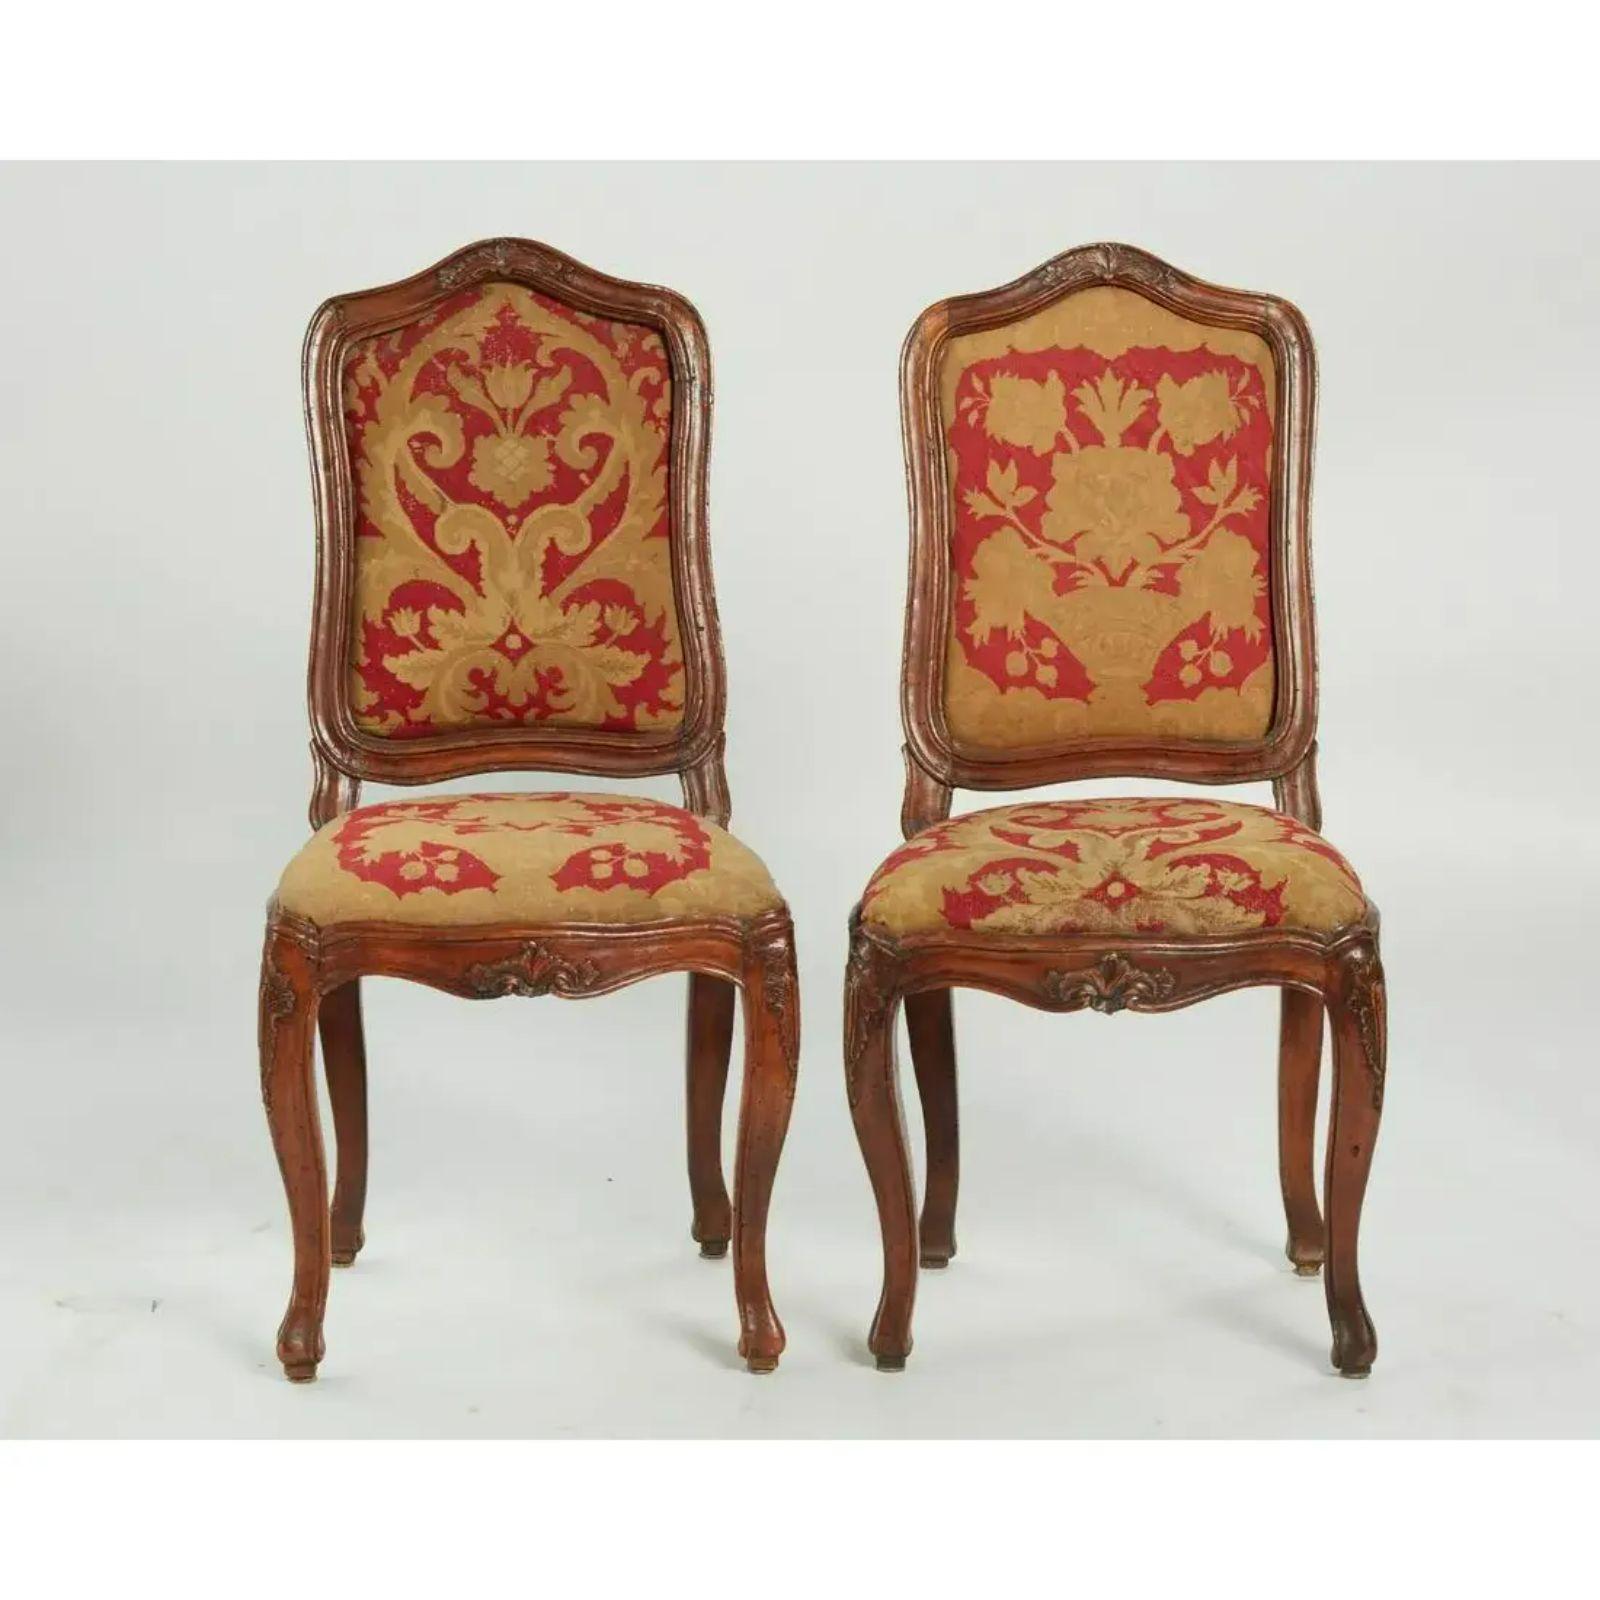 Antique Italian Rococo Side Chairs, 18th Century In Good Condition For Sale In LOS ANGELES, CA